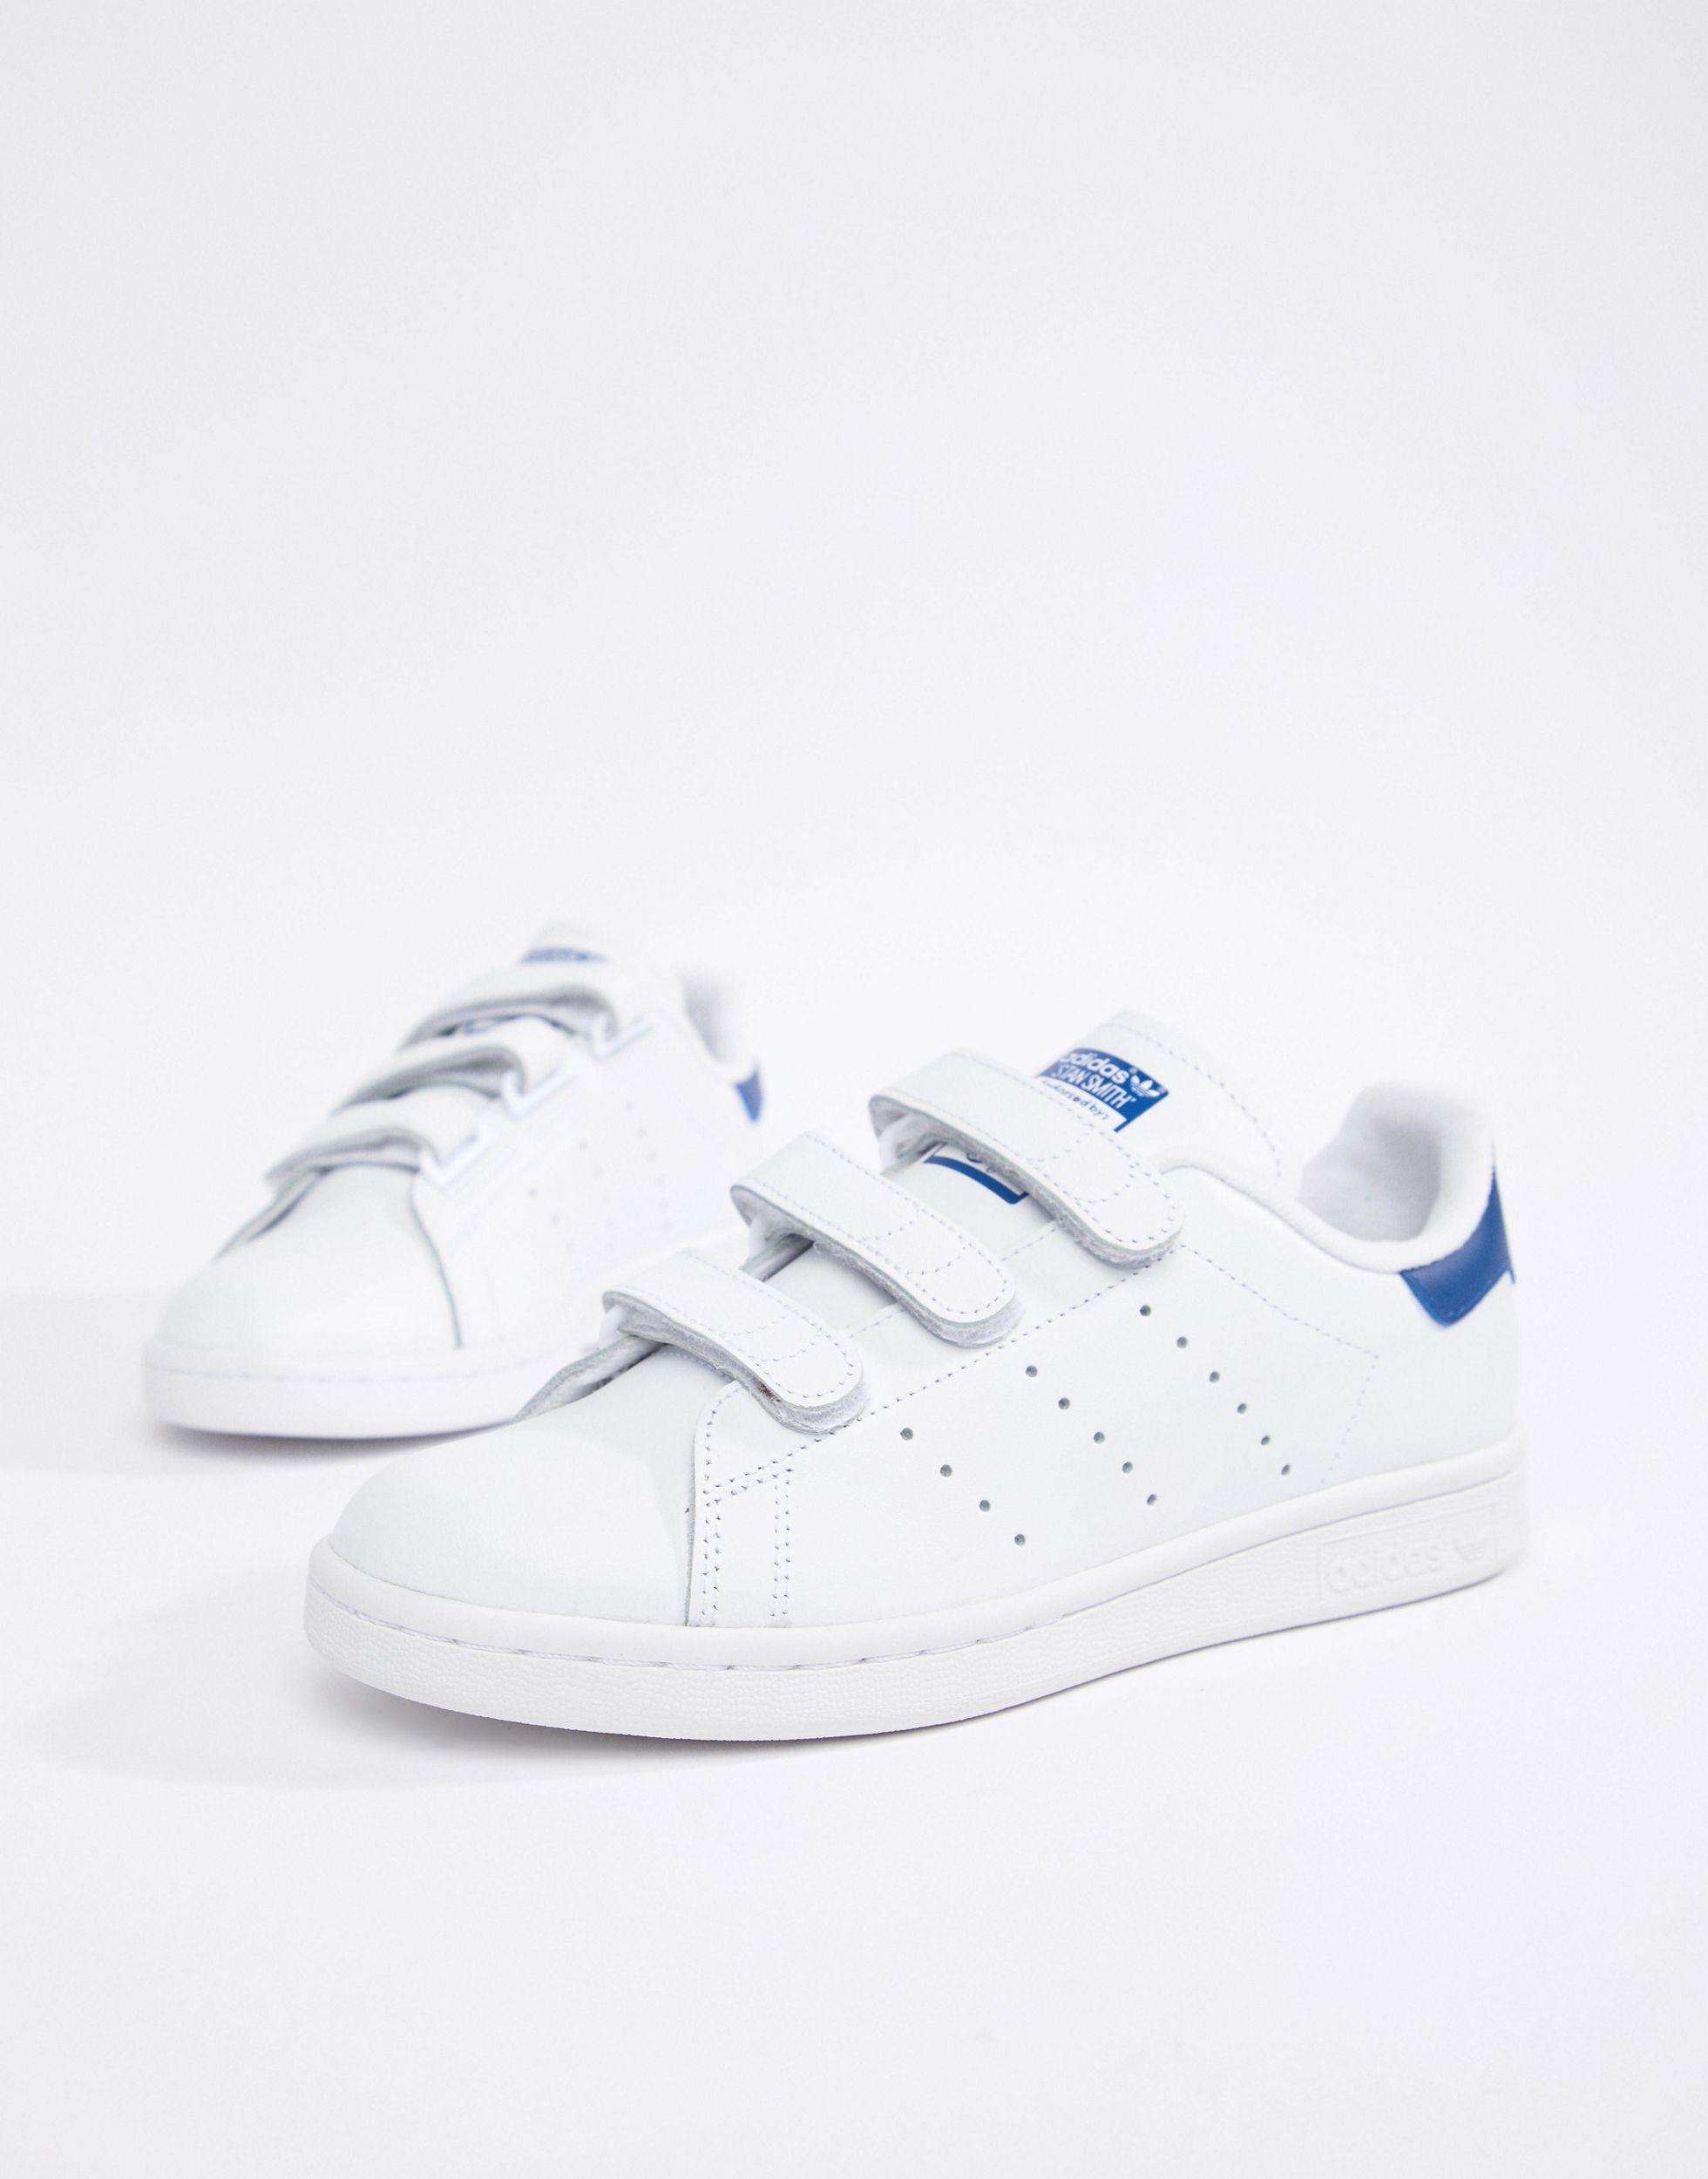 adidas Originals Stan Smith Velcro Trainers in White | Lyst